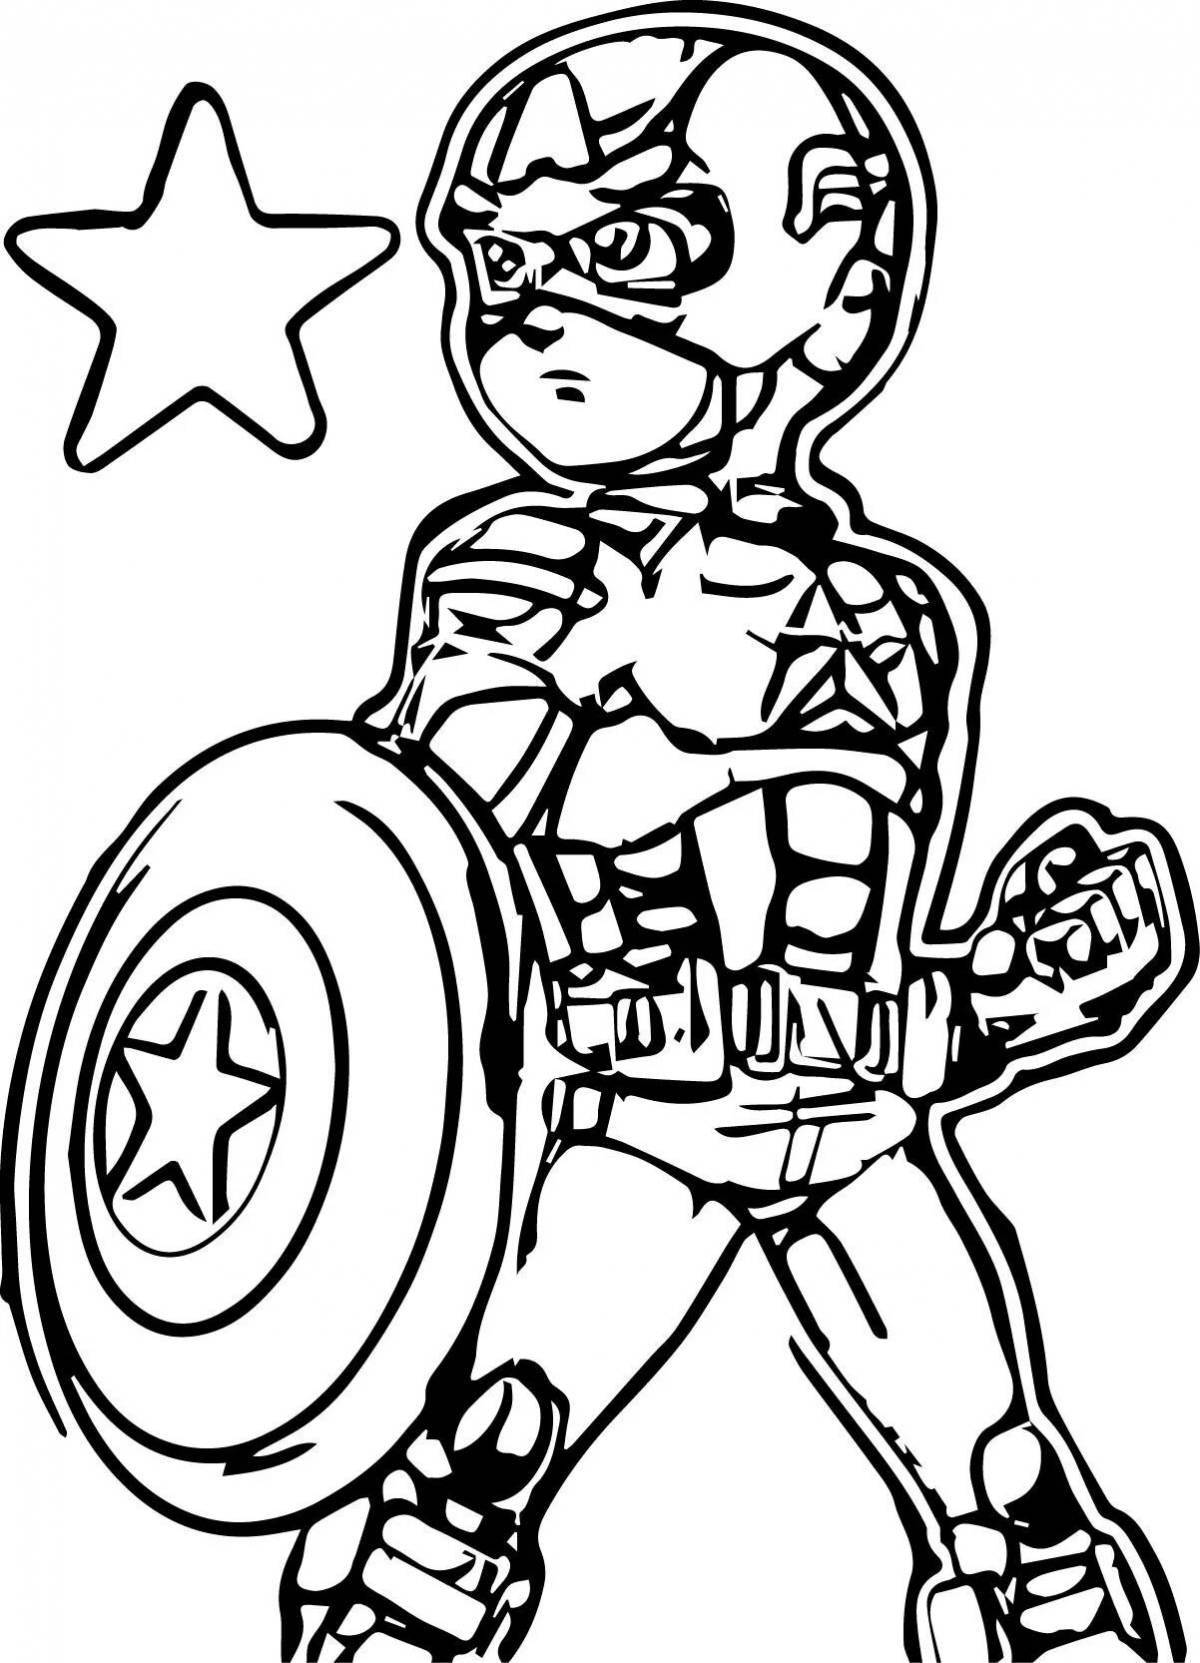 Adorable zombie captain america coloring page